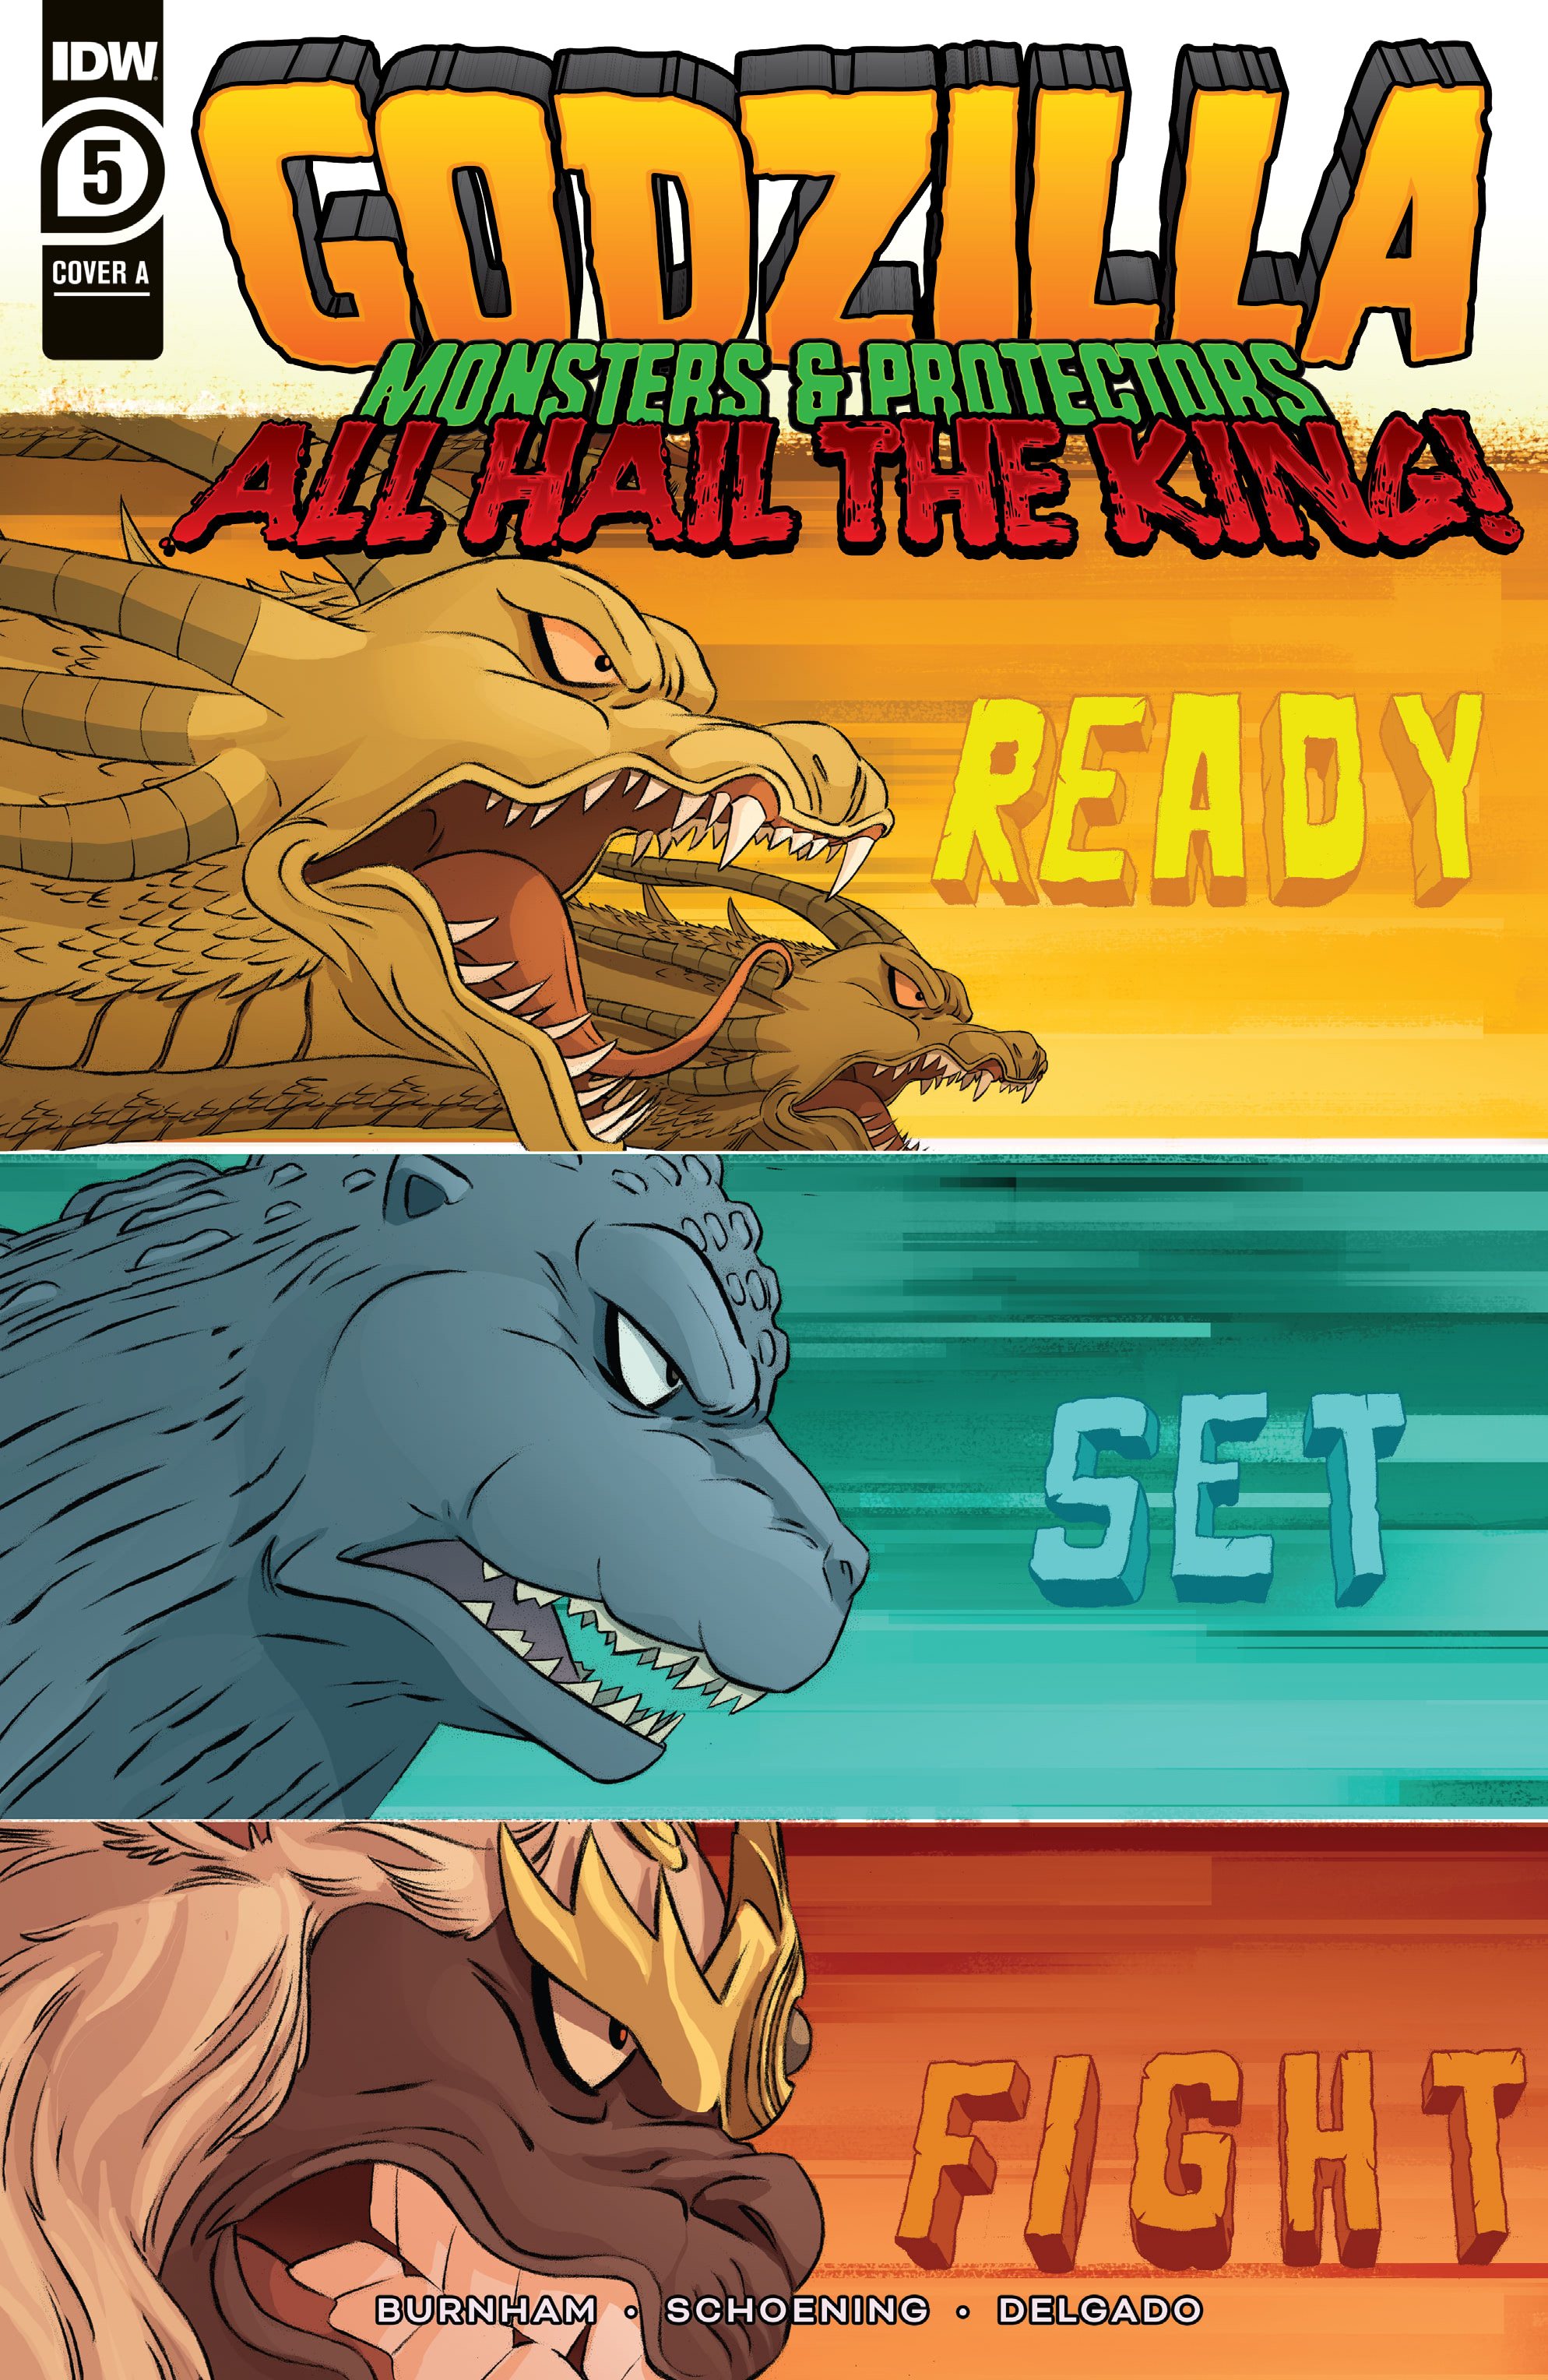 Read online Godzilla: Monsters & Protectors - All Hail the King! comic -  Issue #5 - 1